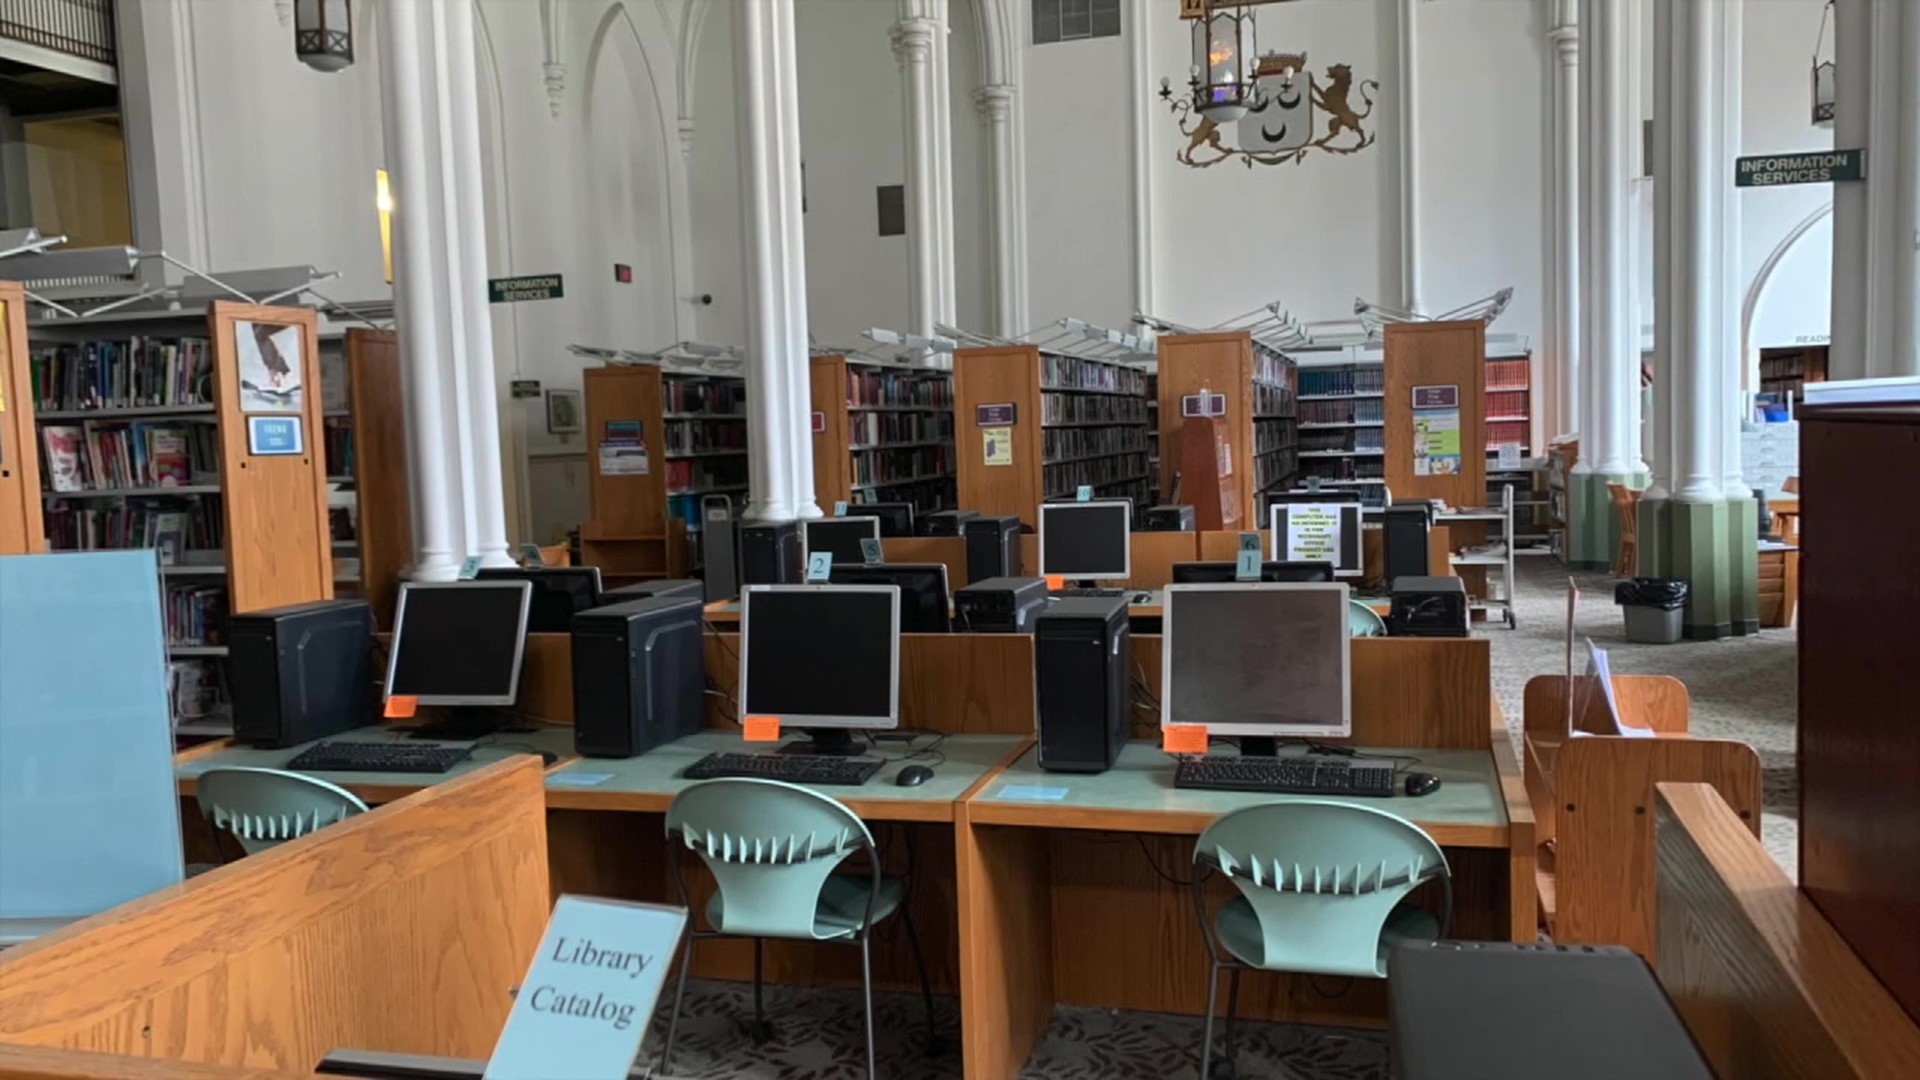 Libraries and schools being closed can put a strain on learning, but there is an online library free for students and families in the meantime.